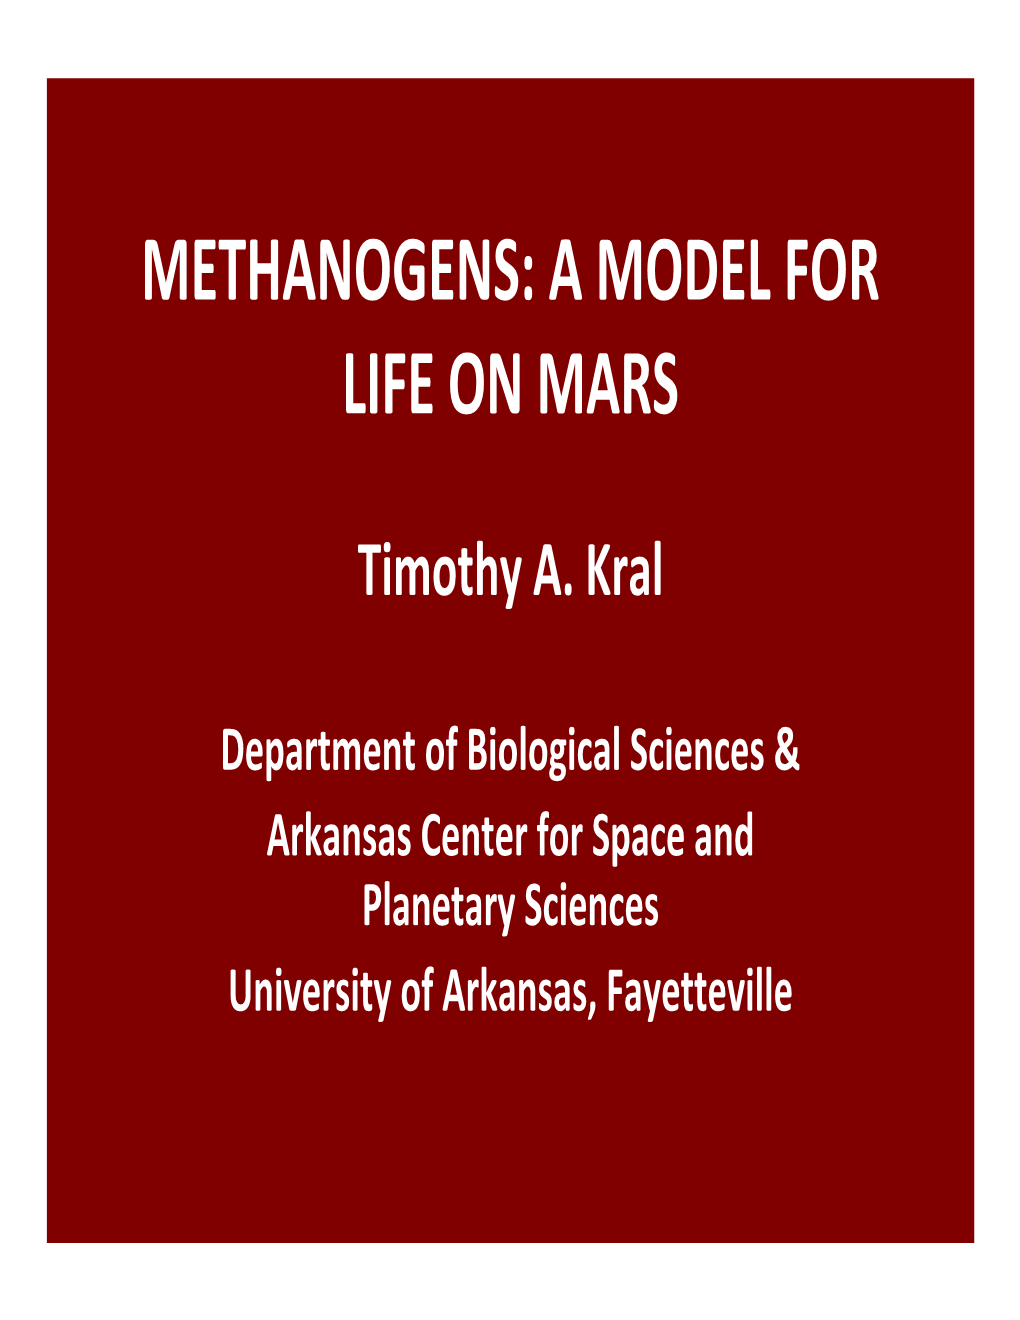 Methanogens: a Model for Life on Mars